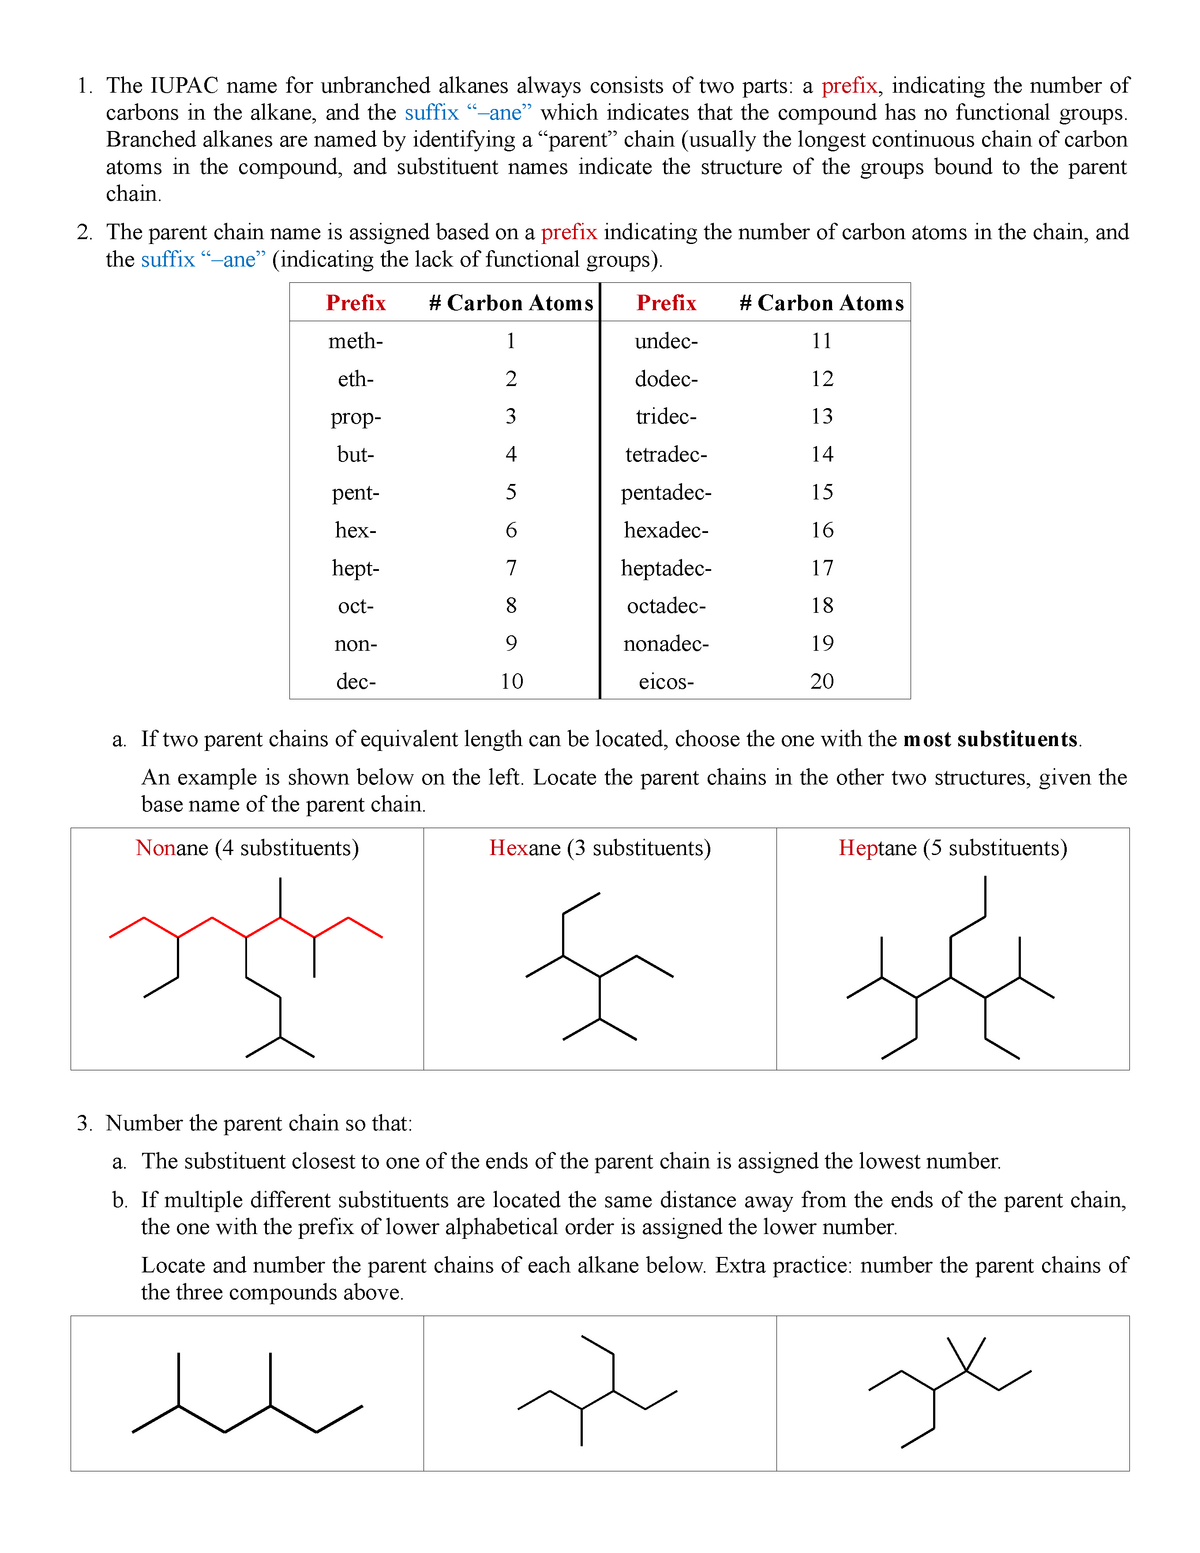 Alkane Nomenclature The Iupac Name For Unbranched Alkanes Always Consists Of Two Parts A